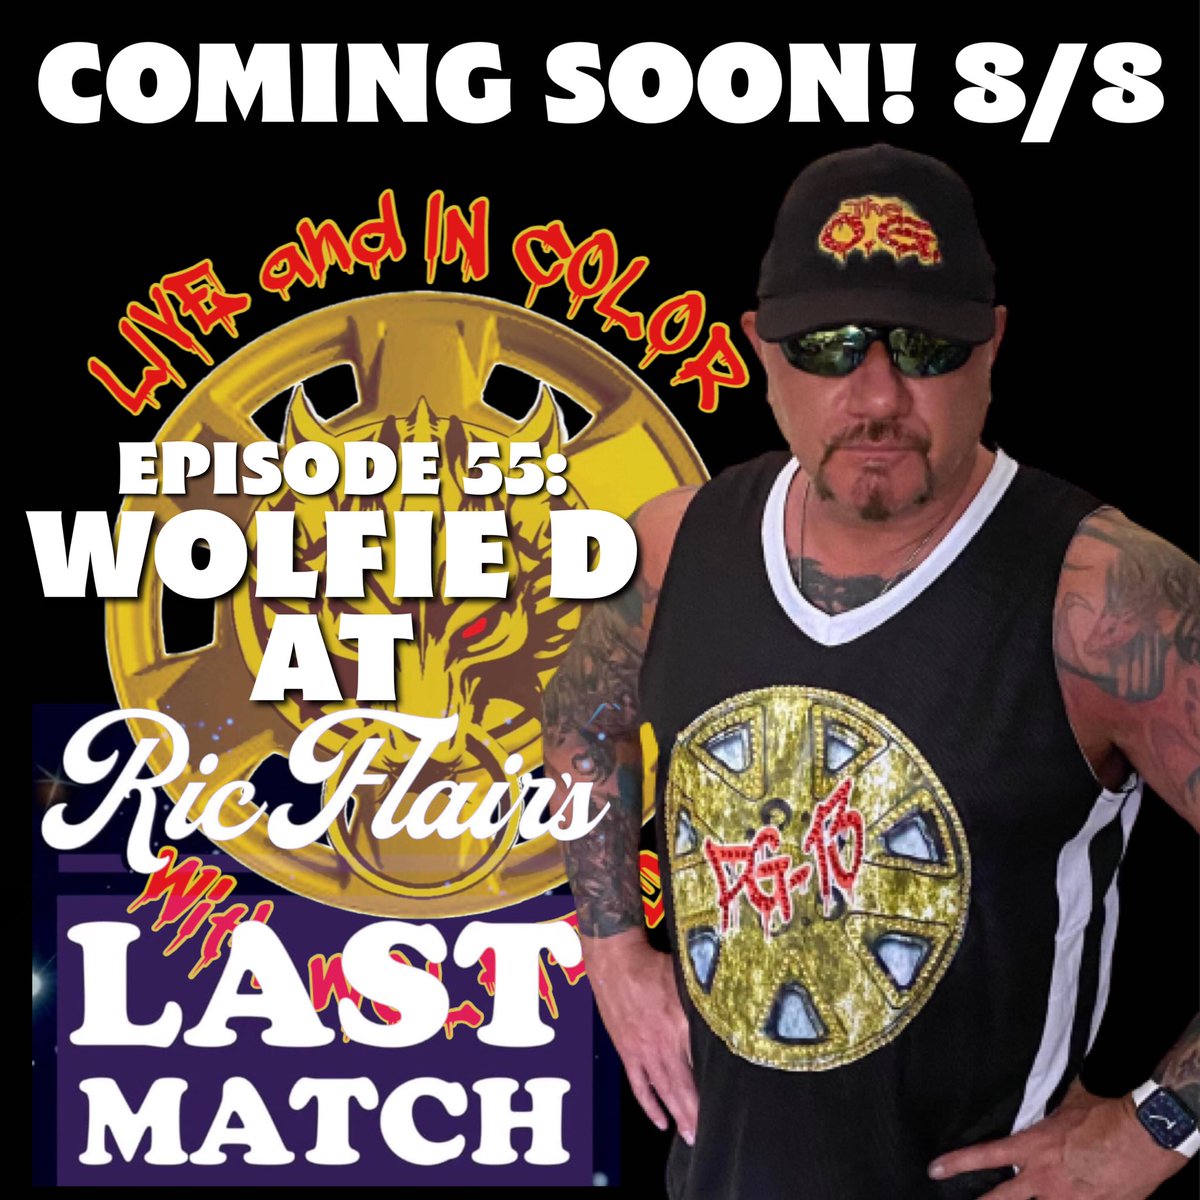 MONDAY, 8/8! We’re talking #WolfieD at Ric Flair’s Last Match! Hear all about his experience there from start to finish!! We cover his experience in the #BunkhouseBattleRoyal to his producer role at the show and so much more! Don’t miss it! #RicFlairsLastMatch #StarrcastV